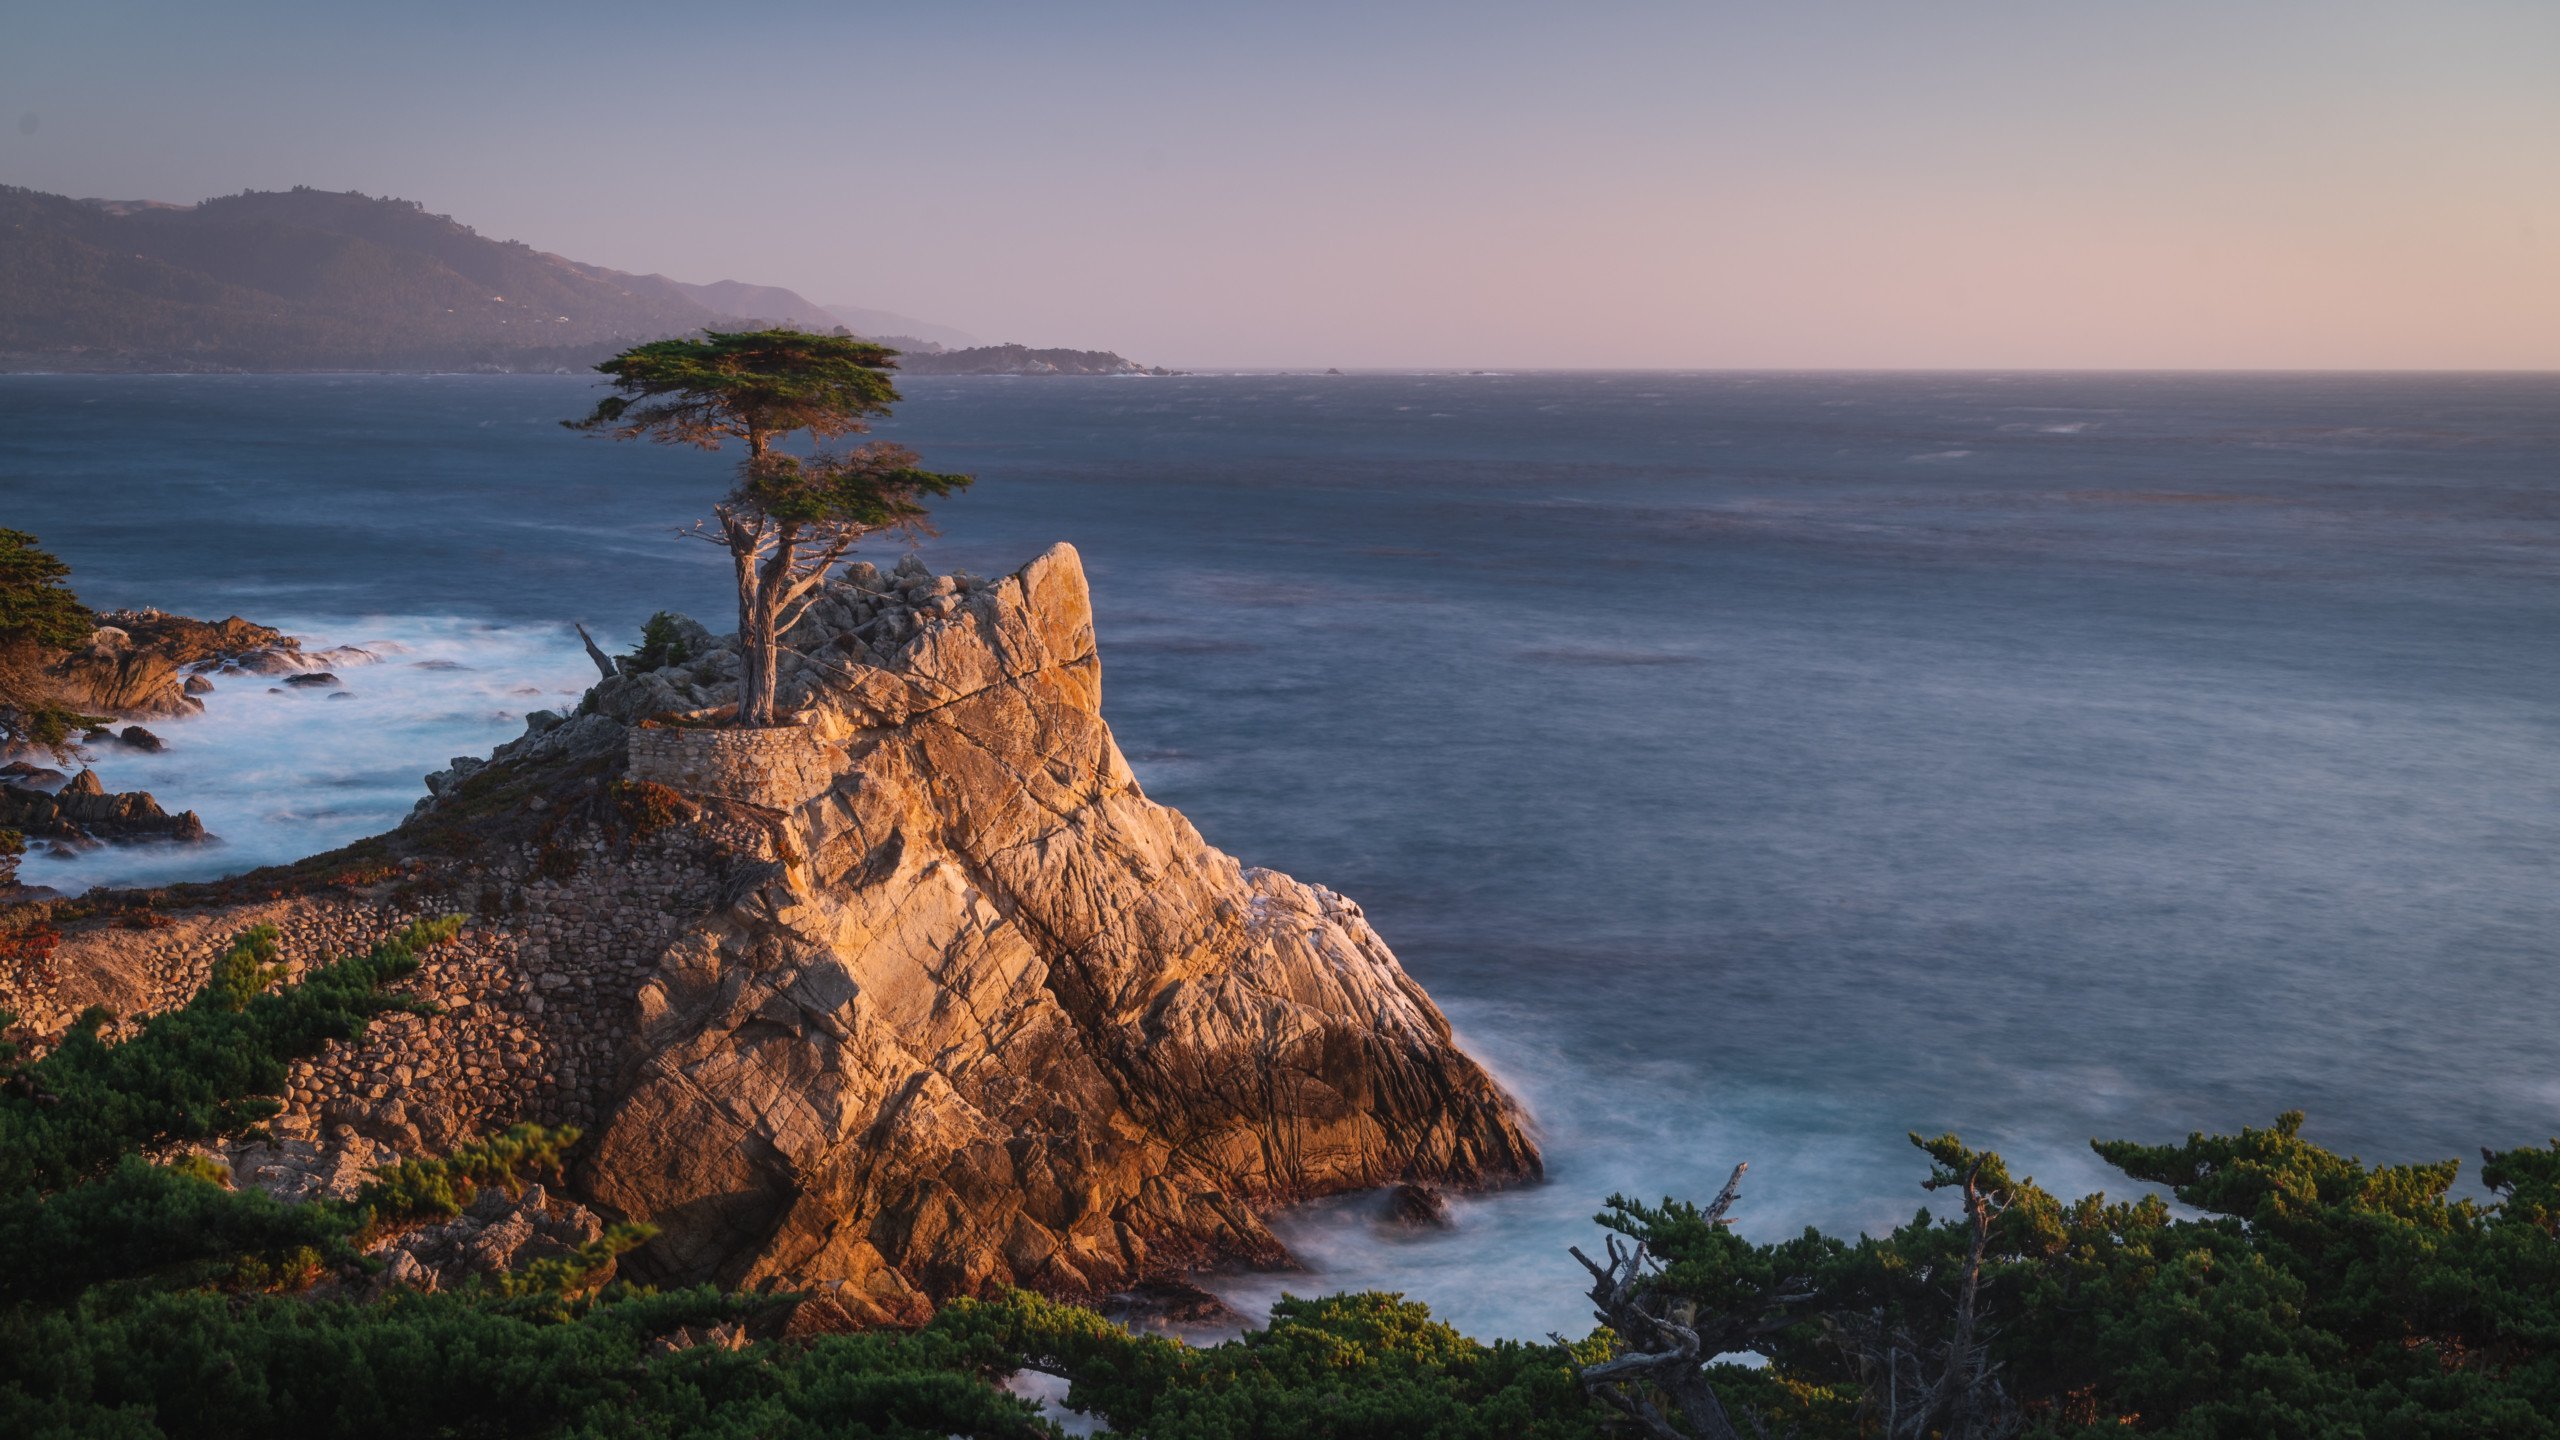 In Defiance of Apple, This is a Nature-Themed macOS Monterey Wallpaper |  PetaPixel